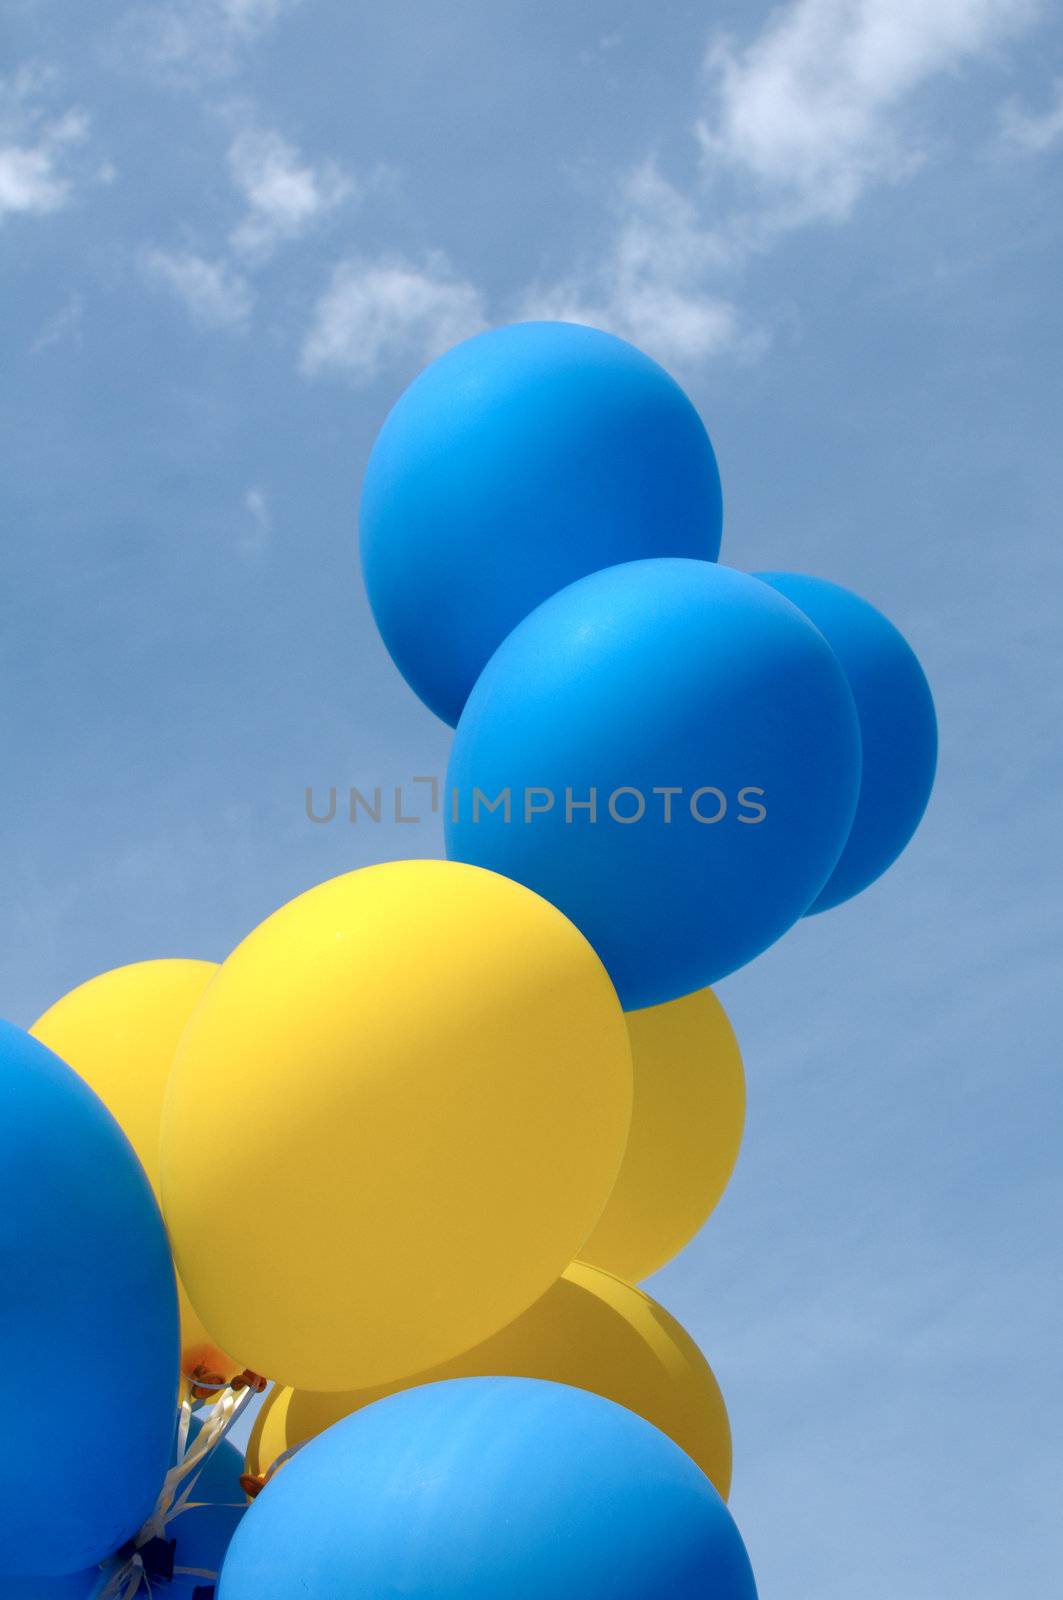 multicolored balloons in the city festival by DNKSTUDIO